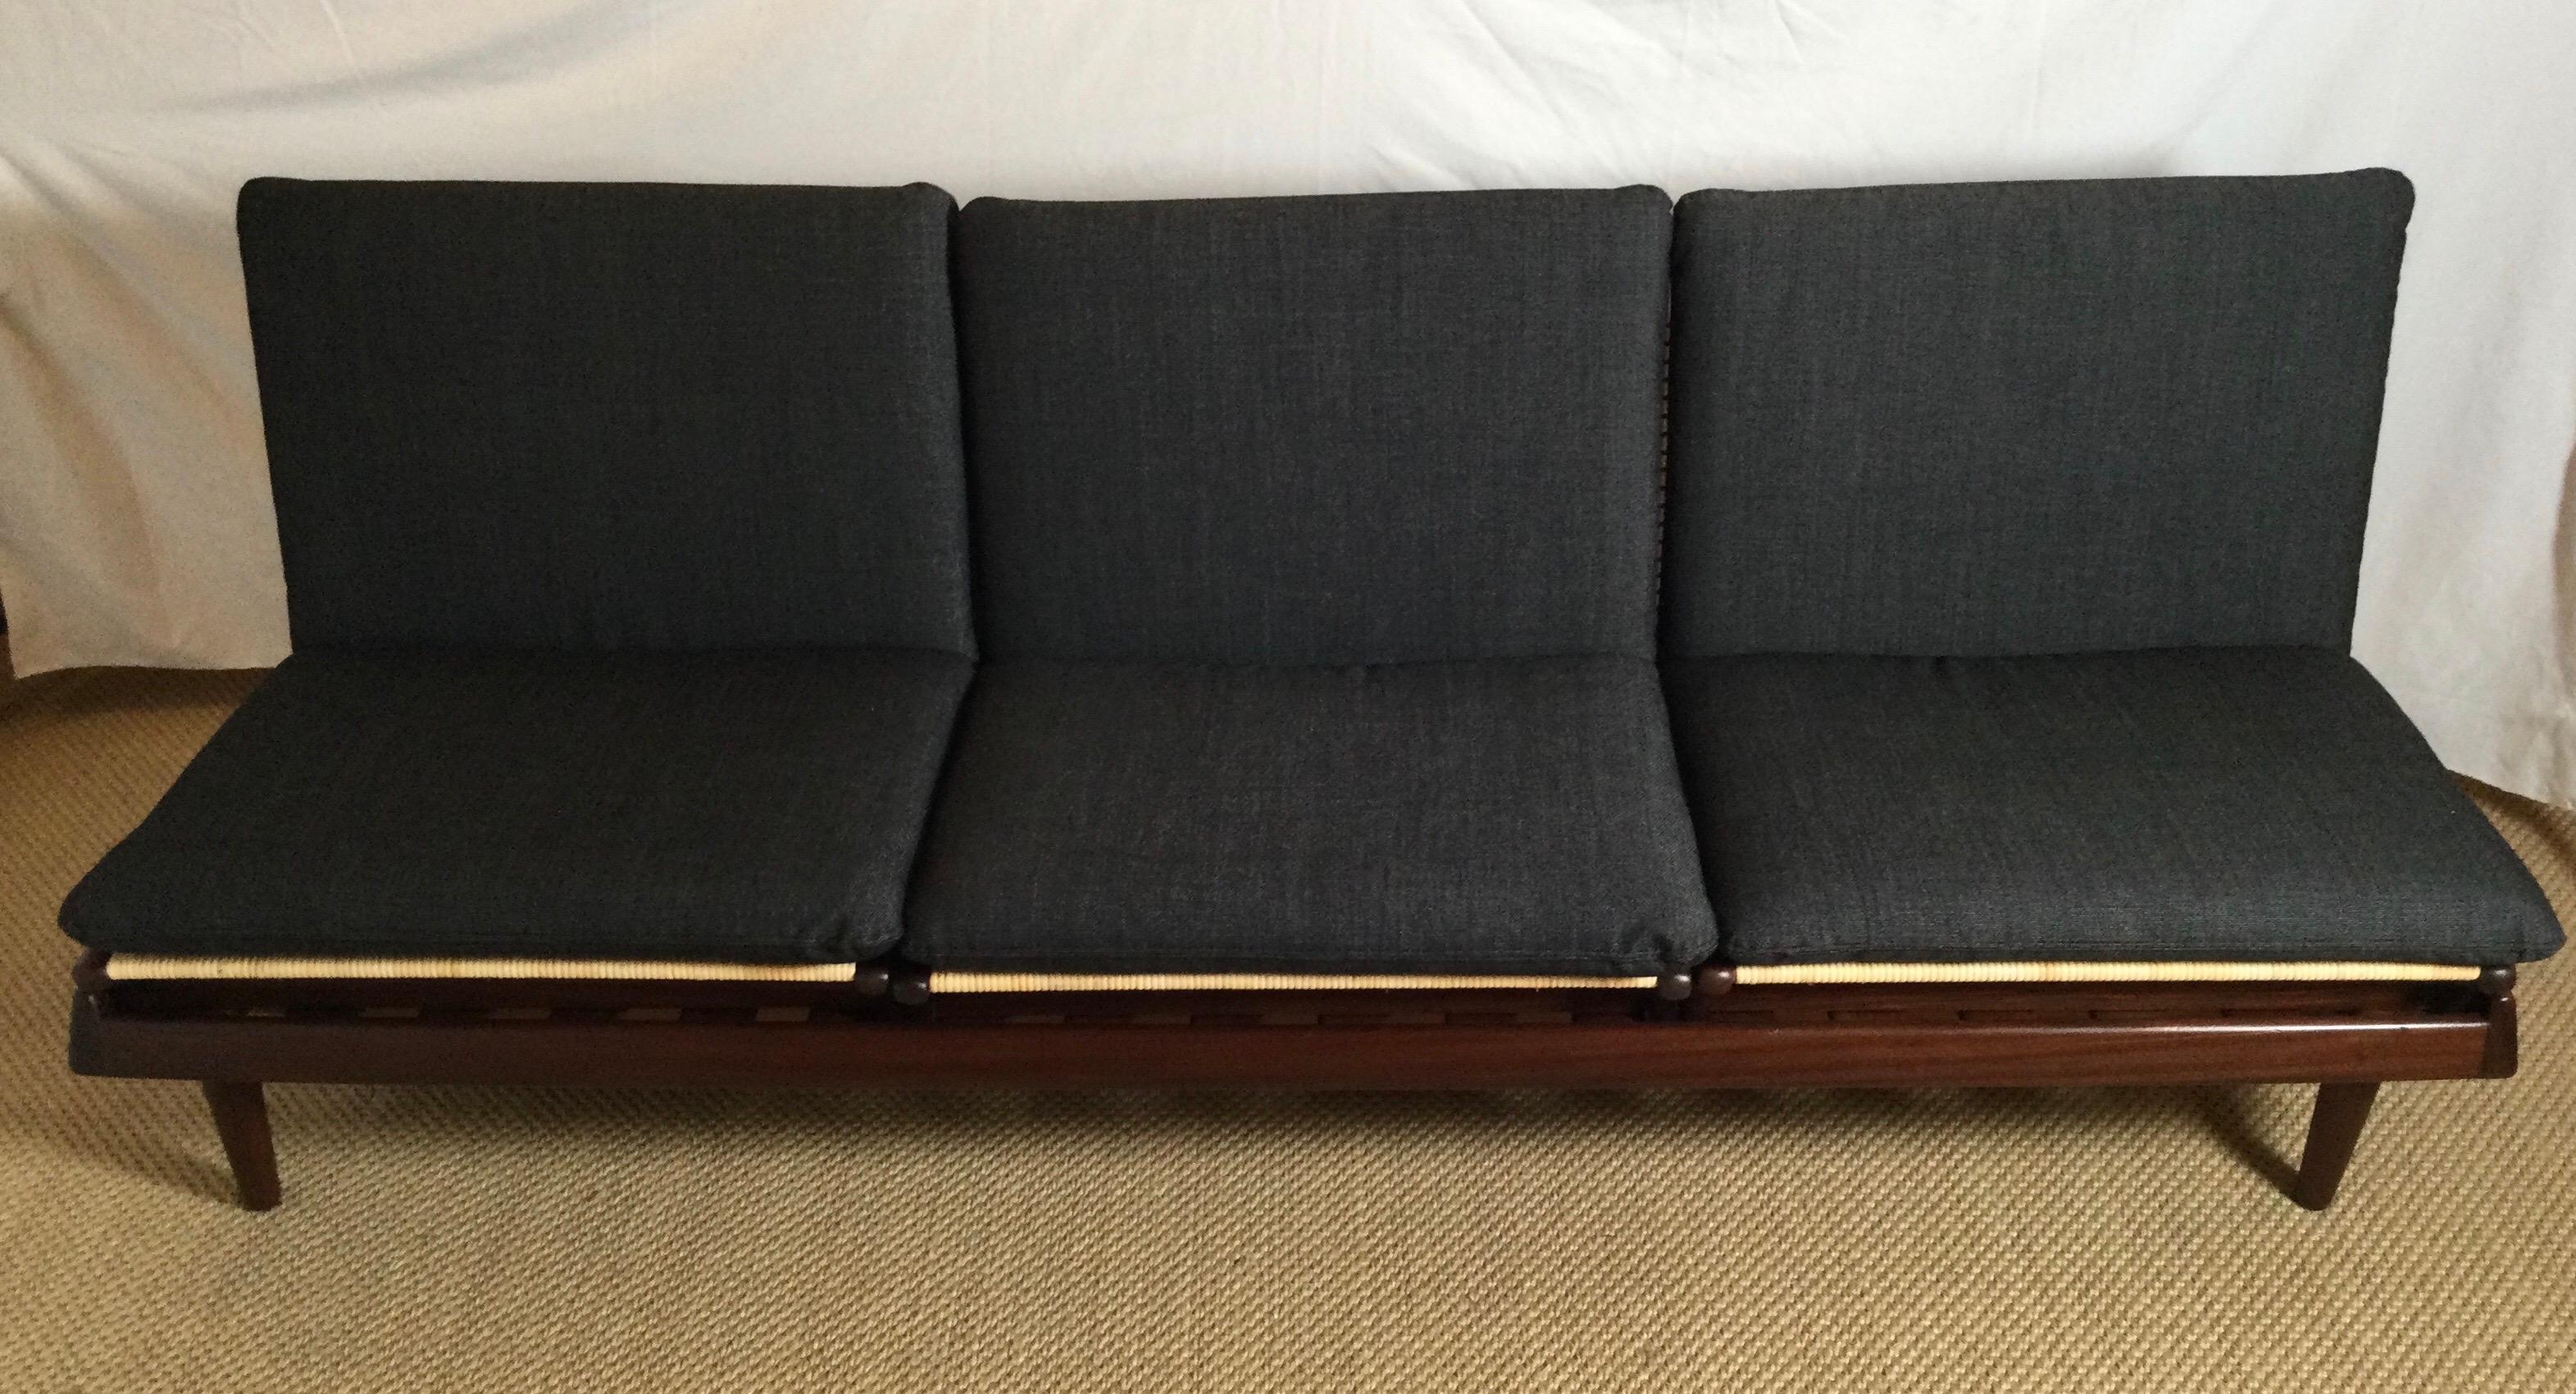 An extraordinary early example of a TV modular sofa designed by Hans Olsen and manufactured by Bramin of Denmark. This modular sofa consists of one bench with three seats. The bench can be used as a daybed or the elevated framework for the three